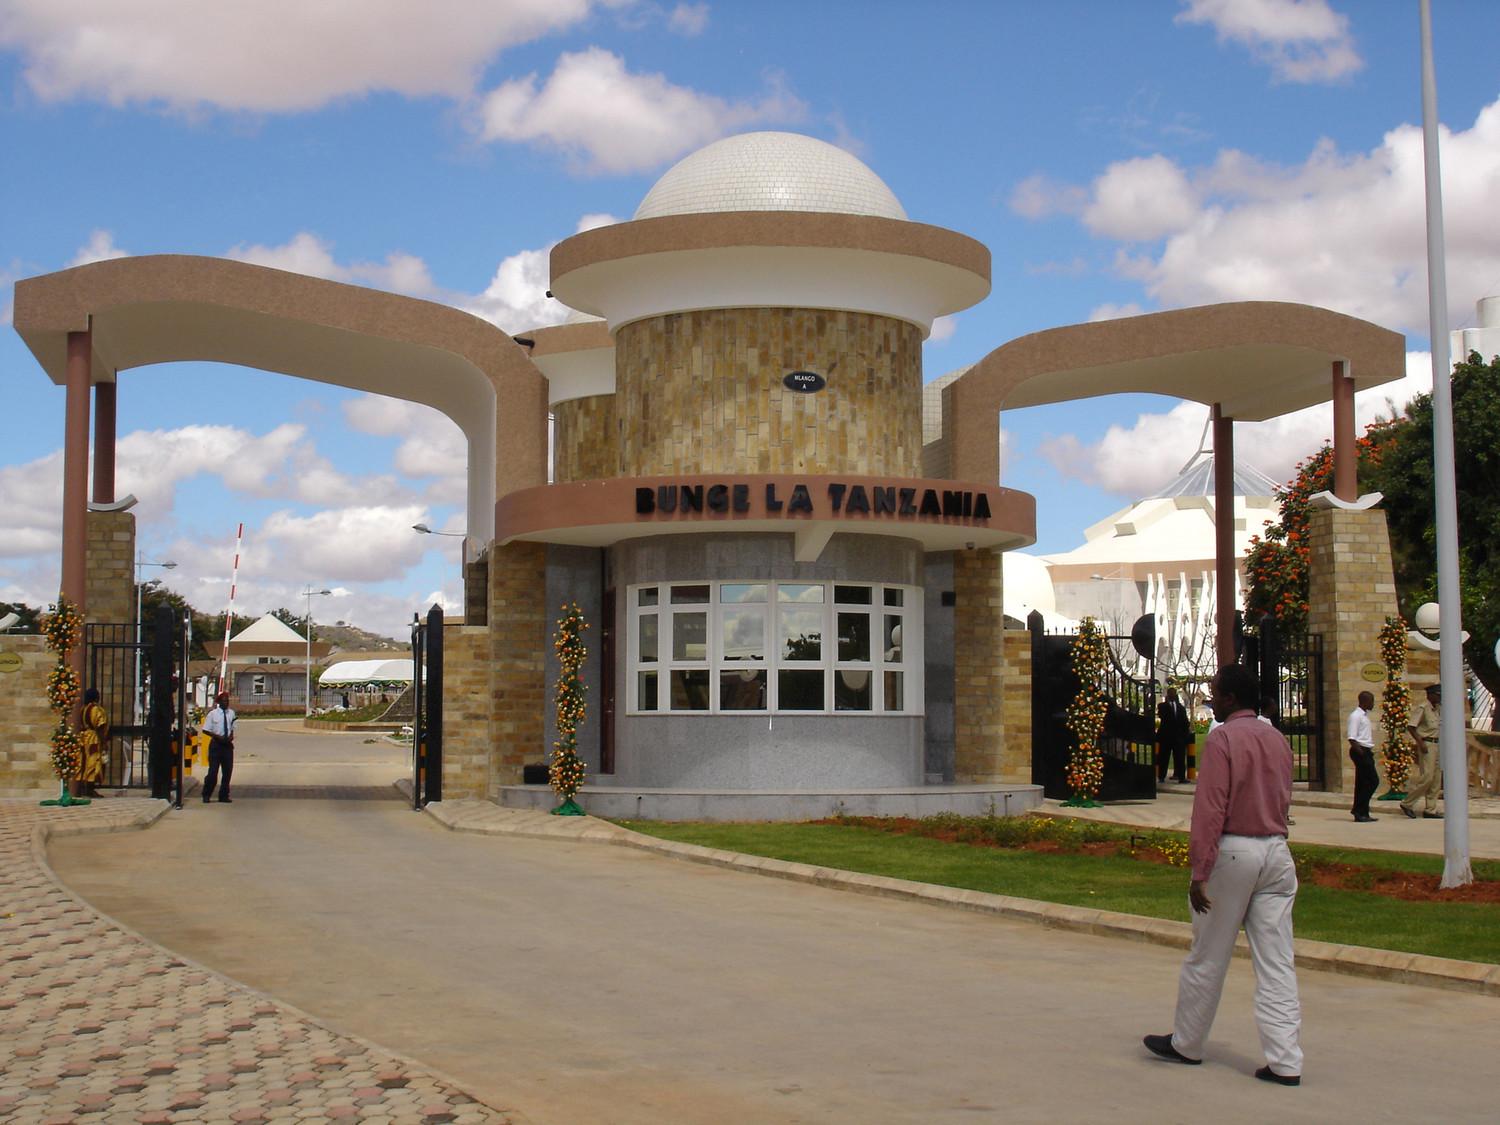 Main entrance to the complex